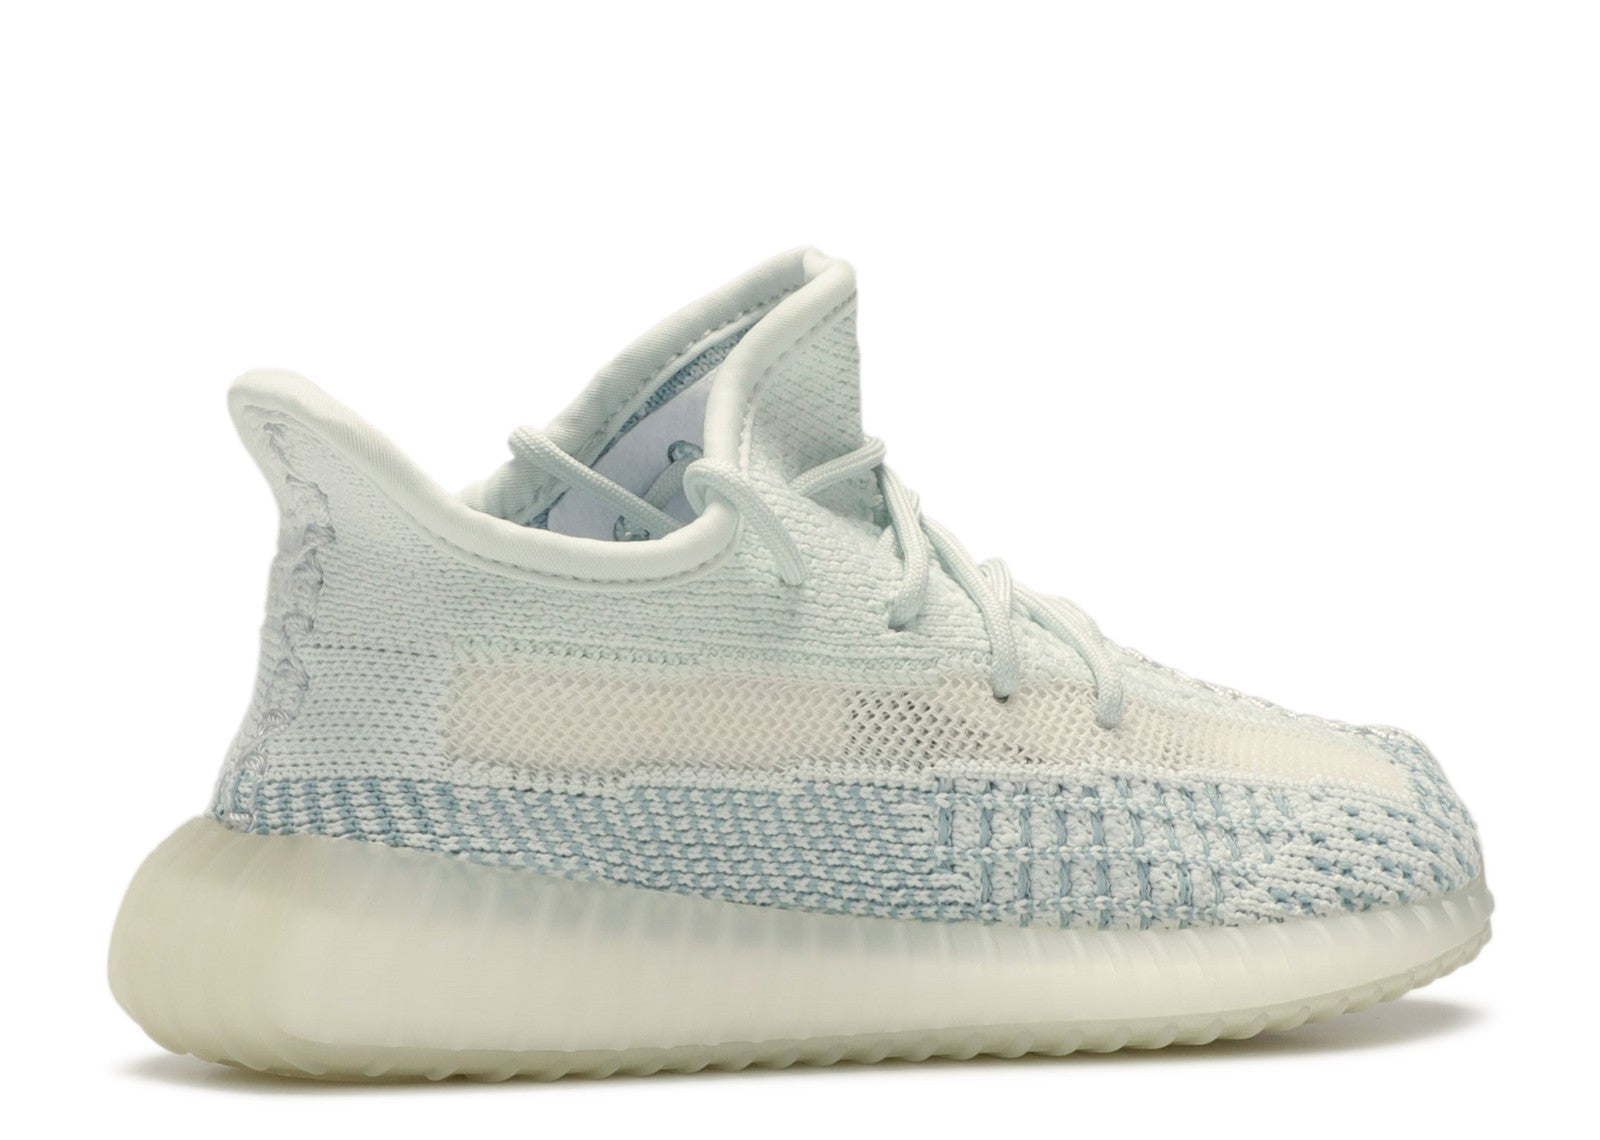 Adidas Yeezy Boost 350 V2 Infant 'Cloud White'